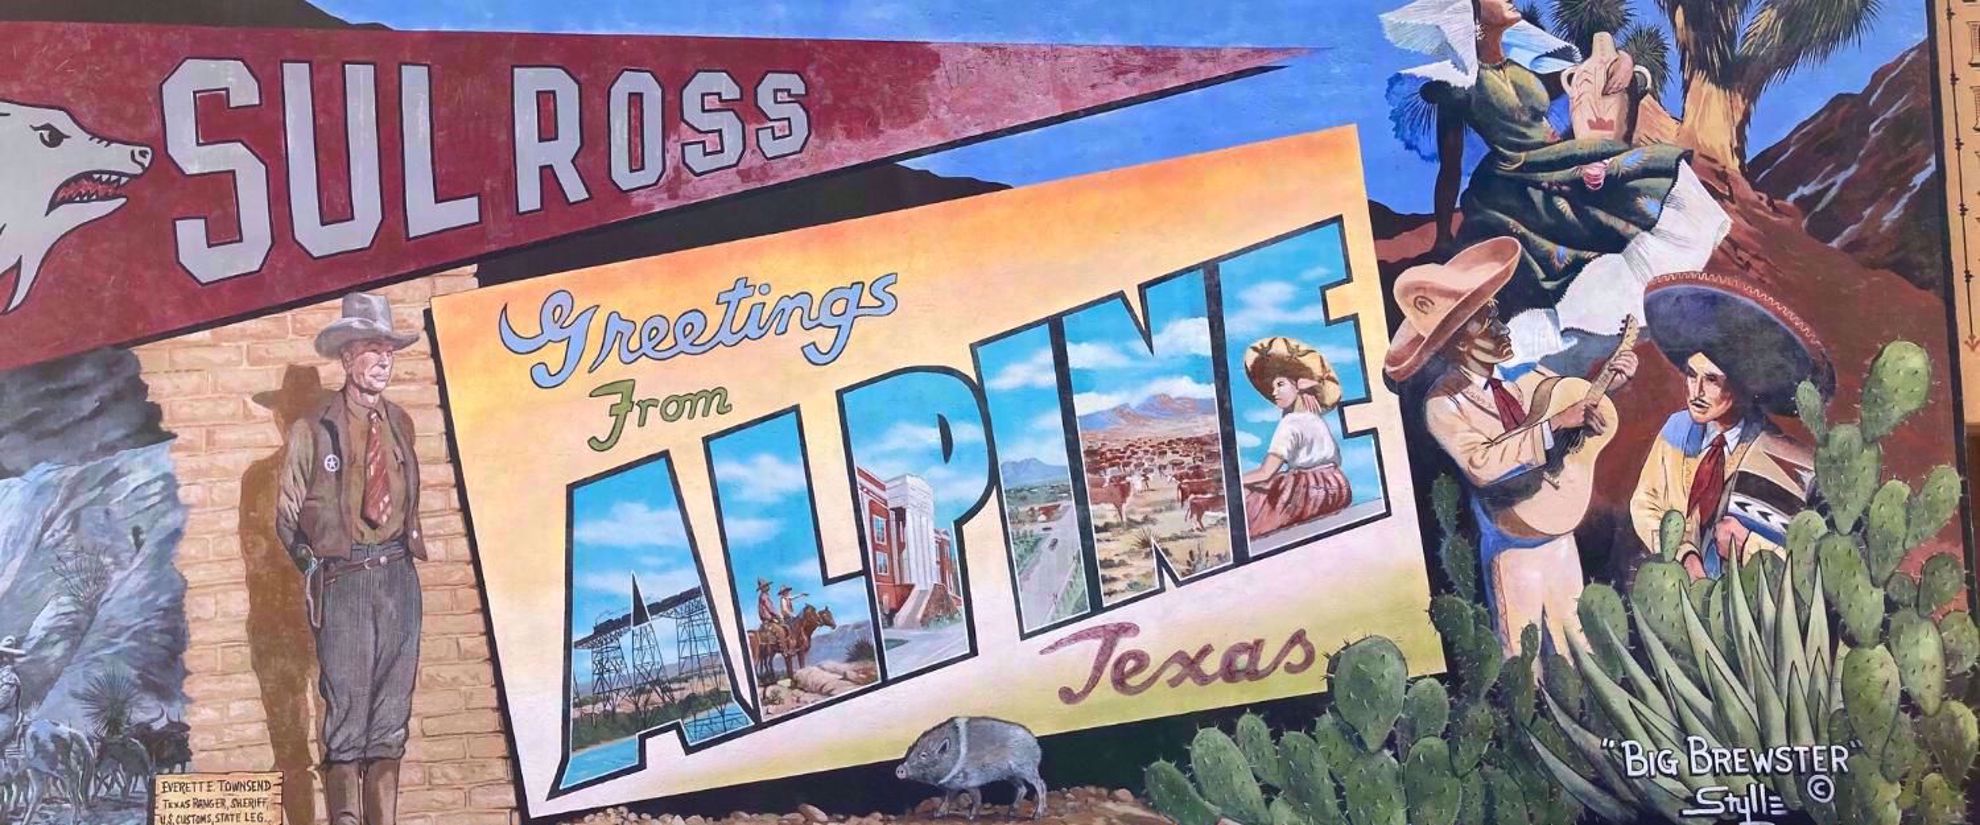 quirky culture of west texas